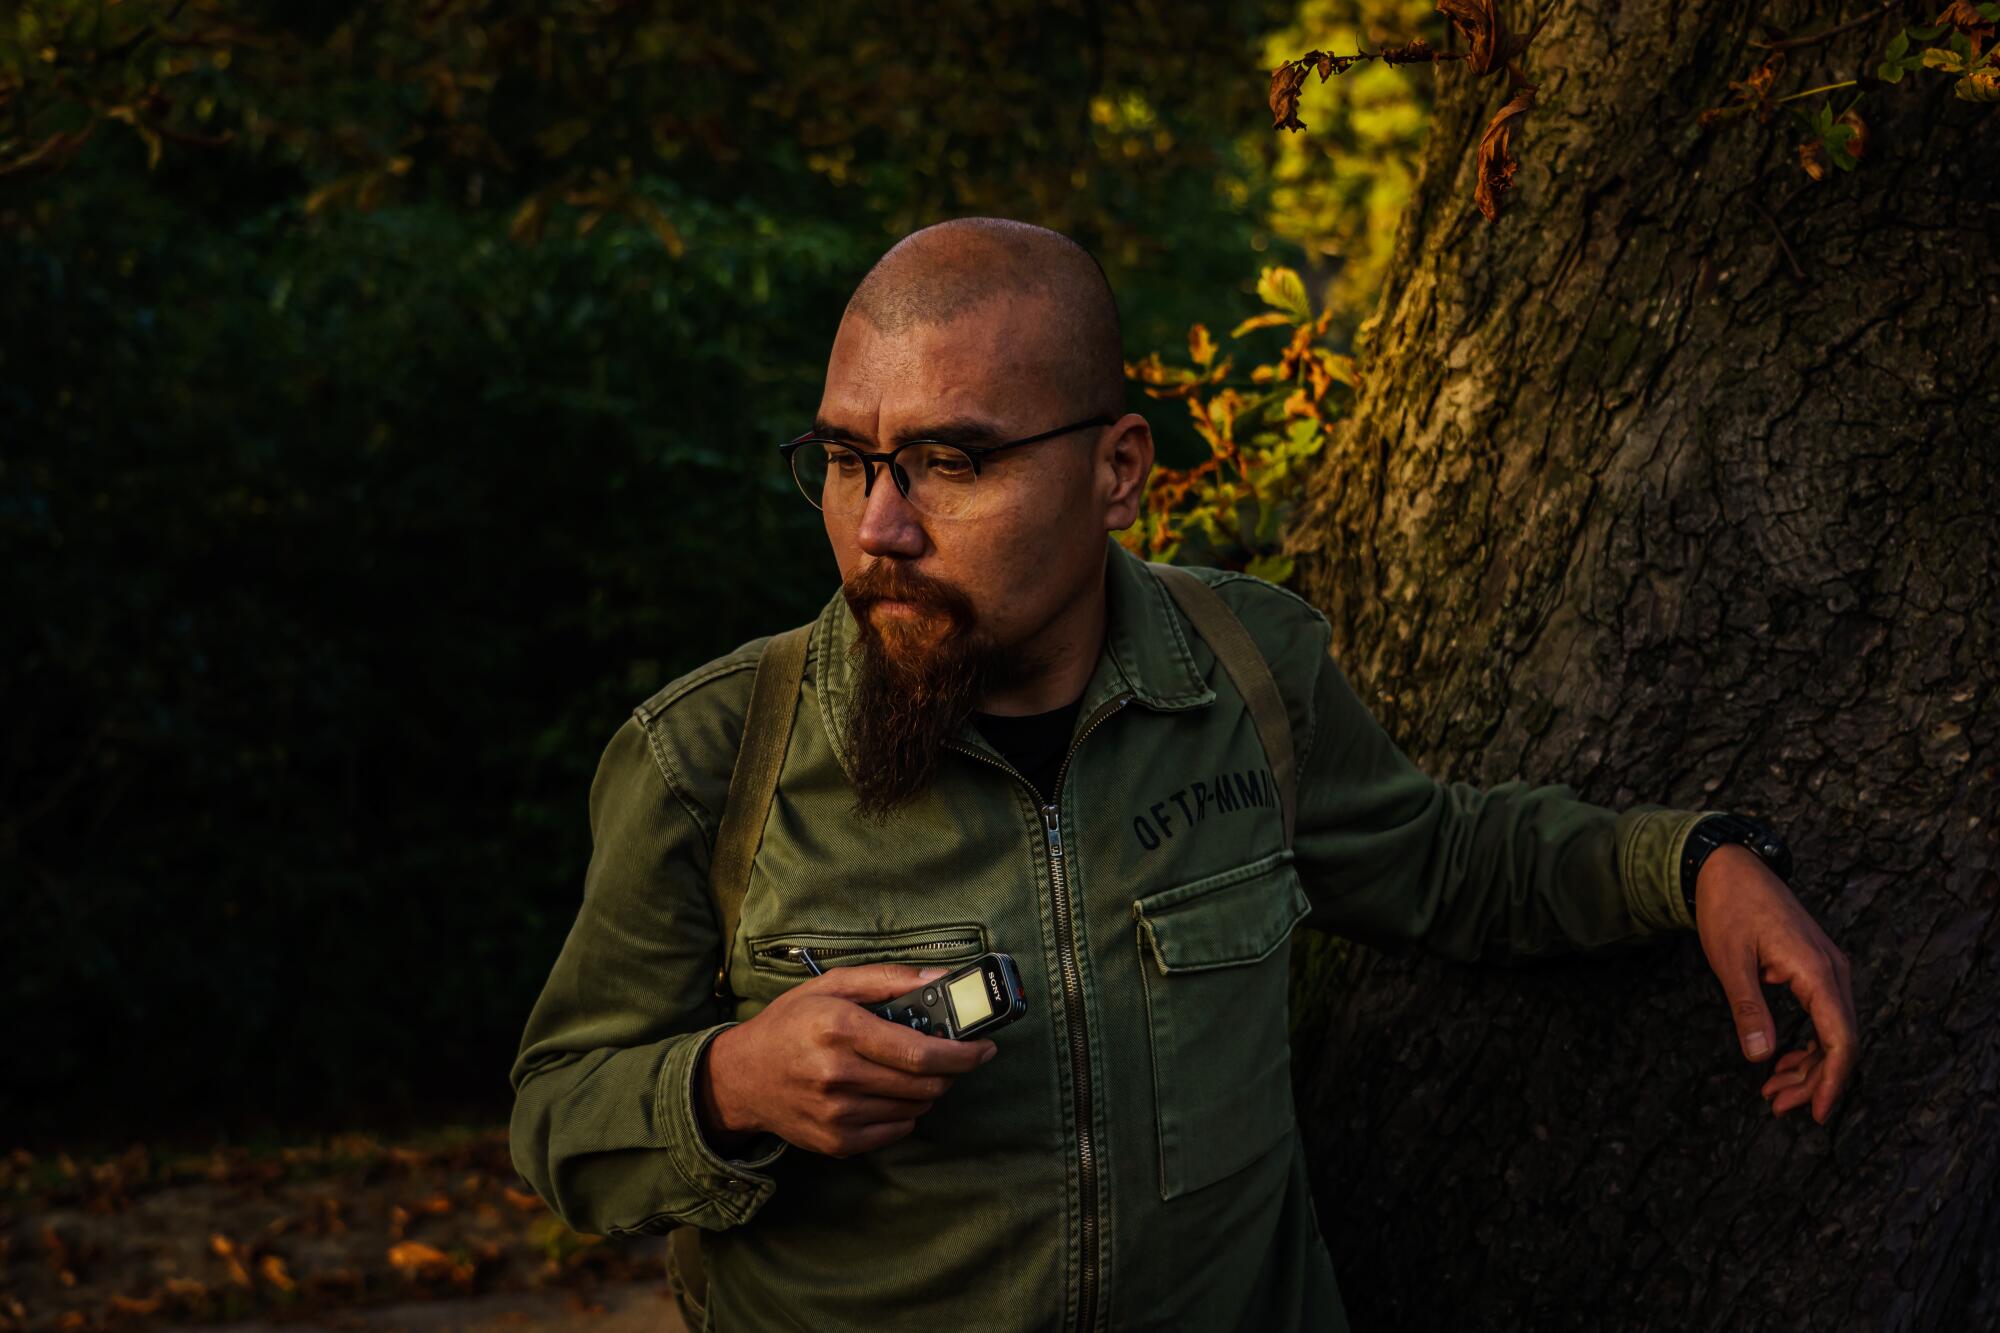 A man holds a digital recorder in park